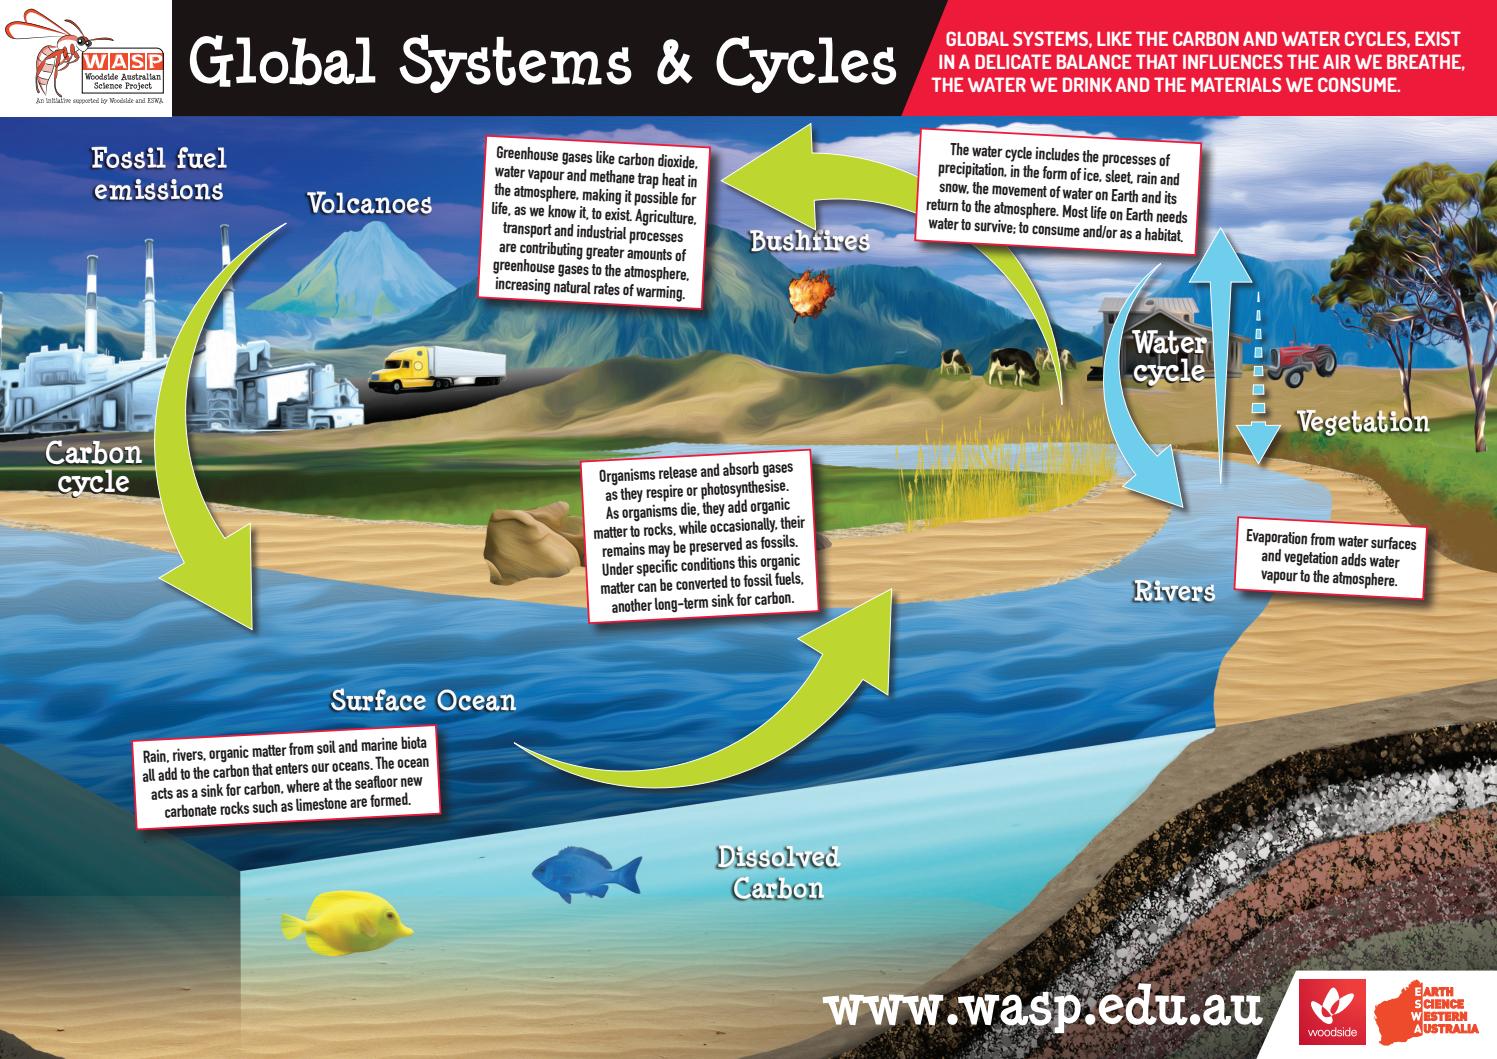 Diagram below shows the Water Cycle